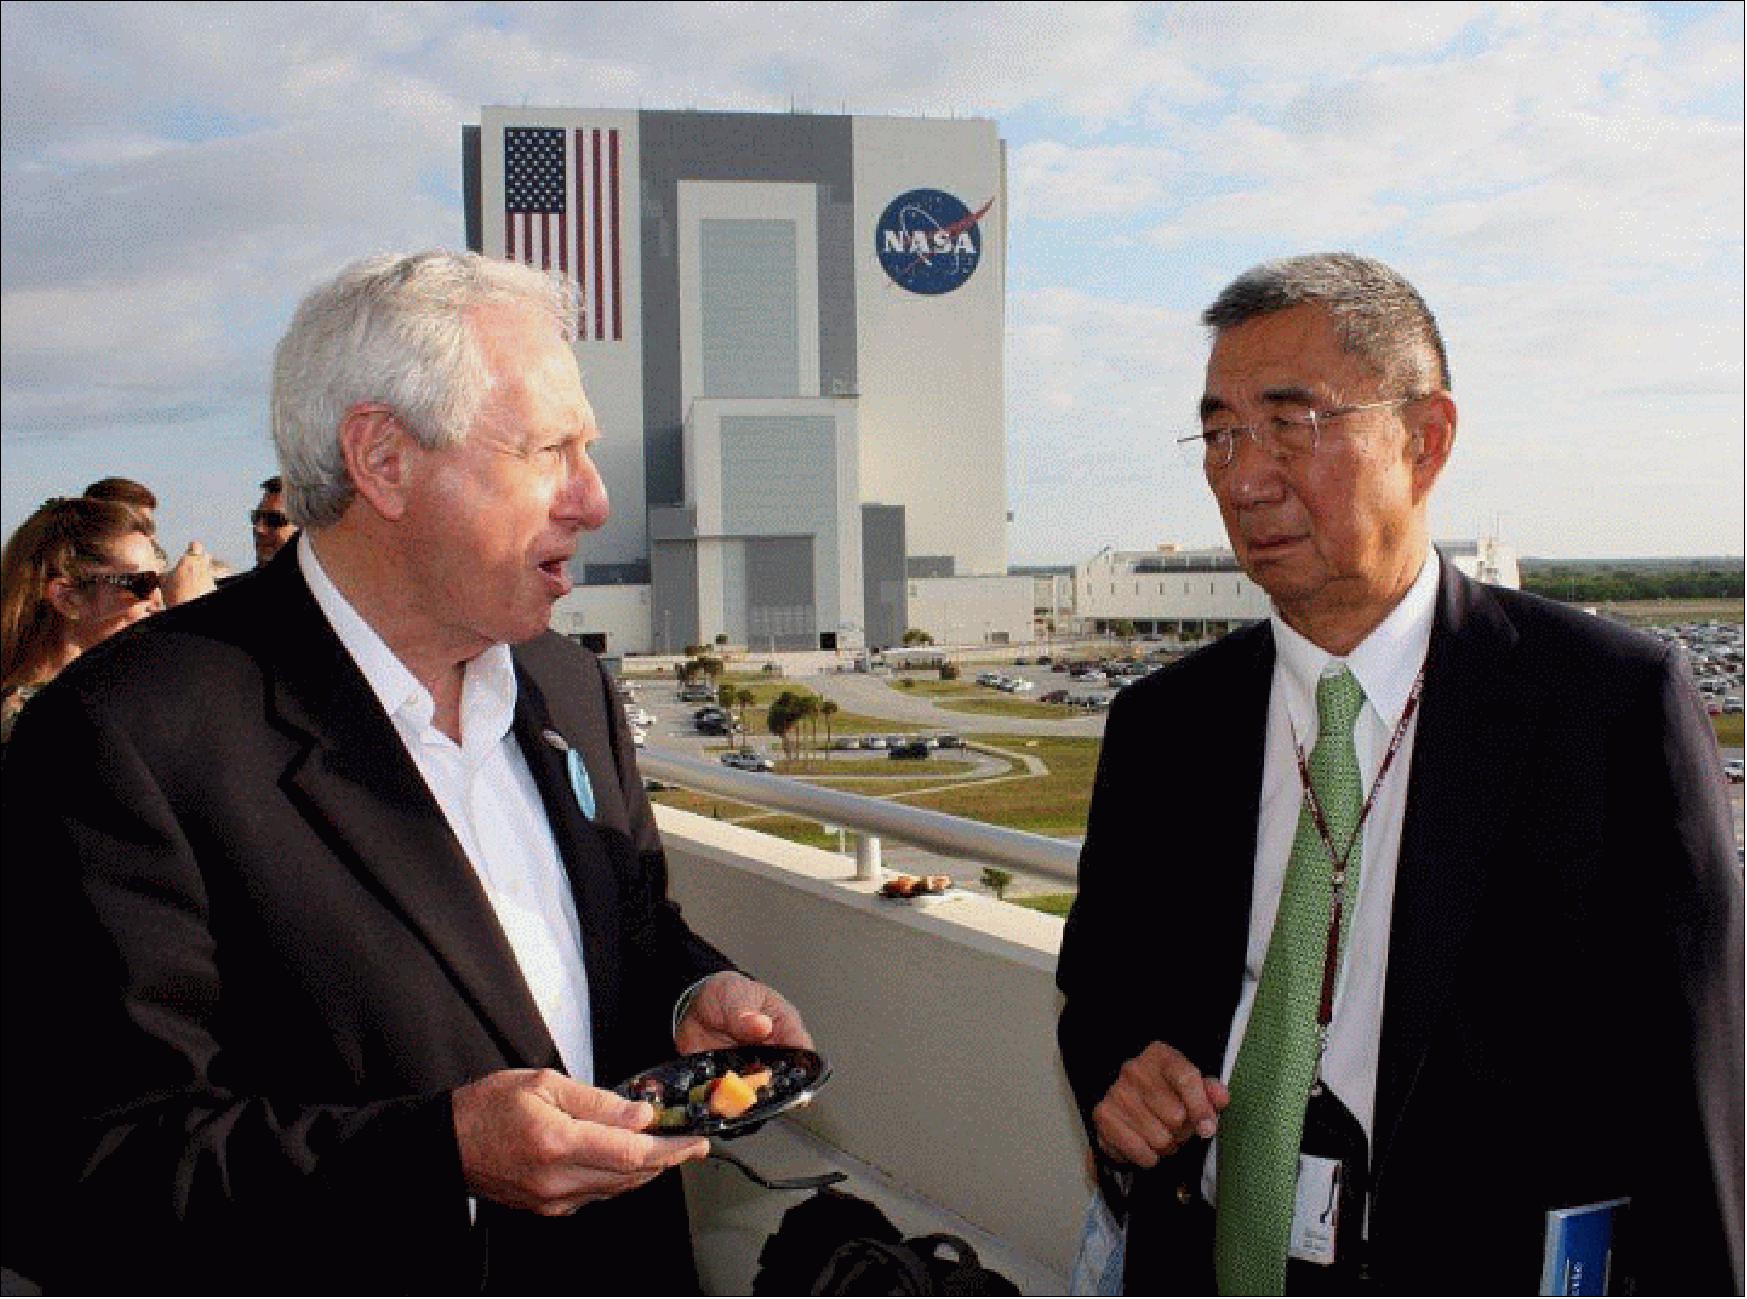 Figure 3: Daniel Goldin, former NASA Administrator realized the unique potential of ISS for fundamental science and has supported AMS from the beginning. The image shows Daniel Goldin (left) and Samuel Ting of MIT on May 16, 2011 when AMS-02 was launched on the Space Shuttle Endeavour (STS-134), image credit: S. Ting (Ref. 53)